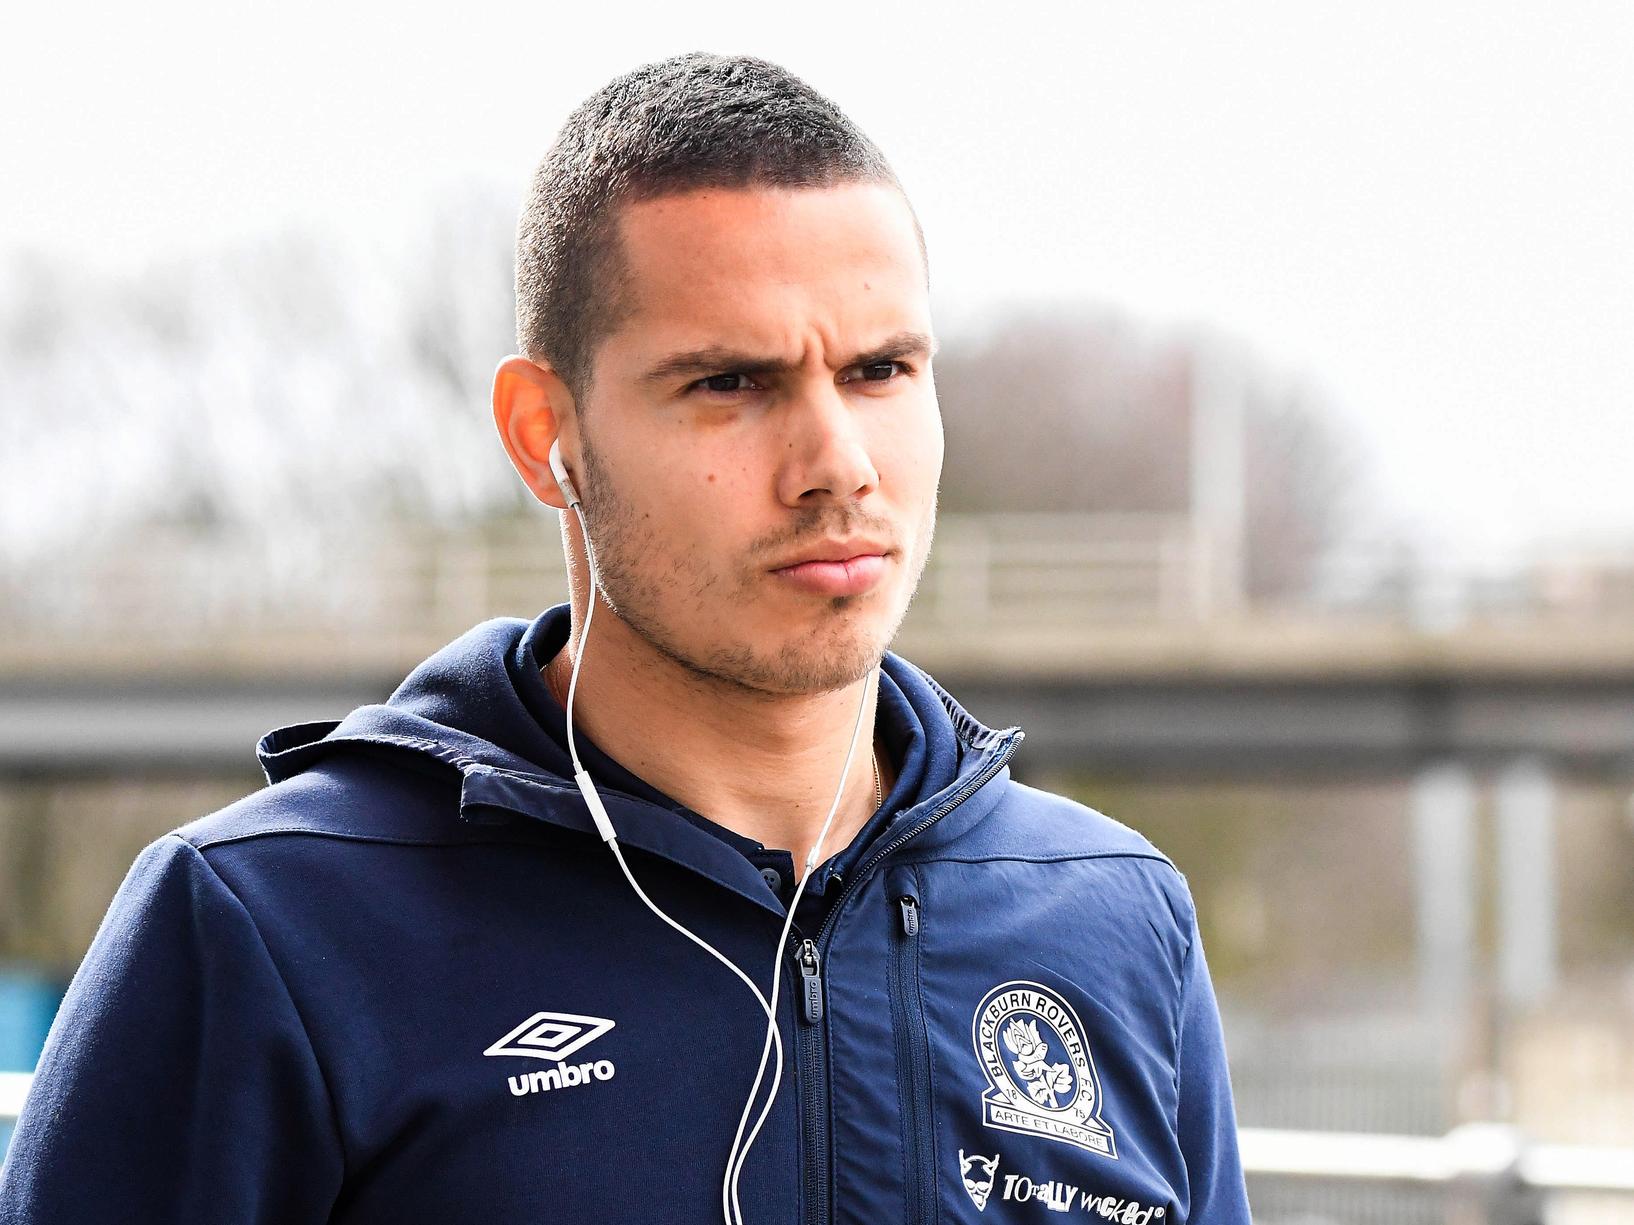 Ex-Blackburn Rovers midfielder Jack Rodwell has reportedly seen a potential move to Serie A side Roma fall through, after he failed to cut the mustard while training with the club. (Football Italia)